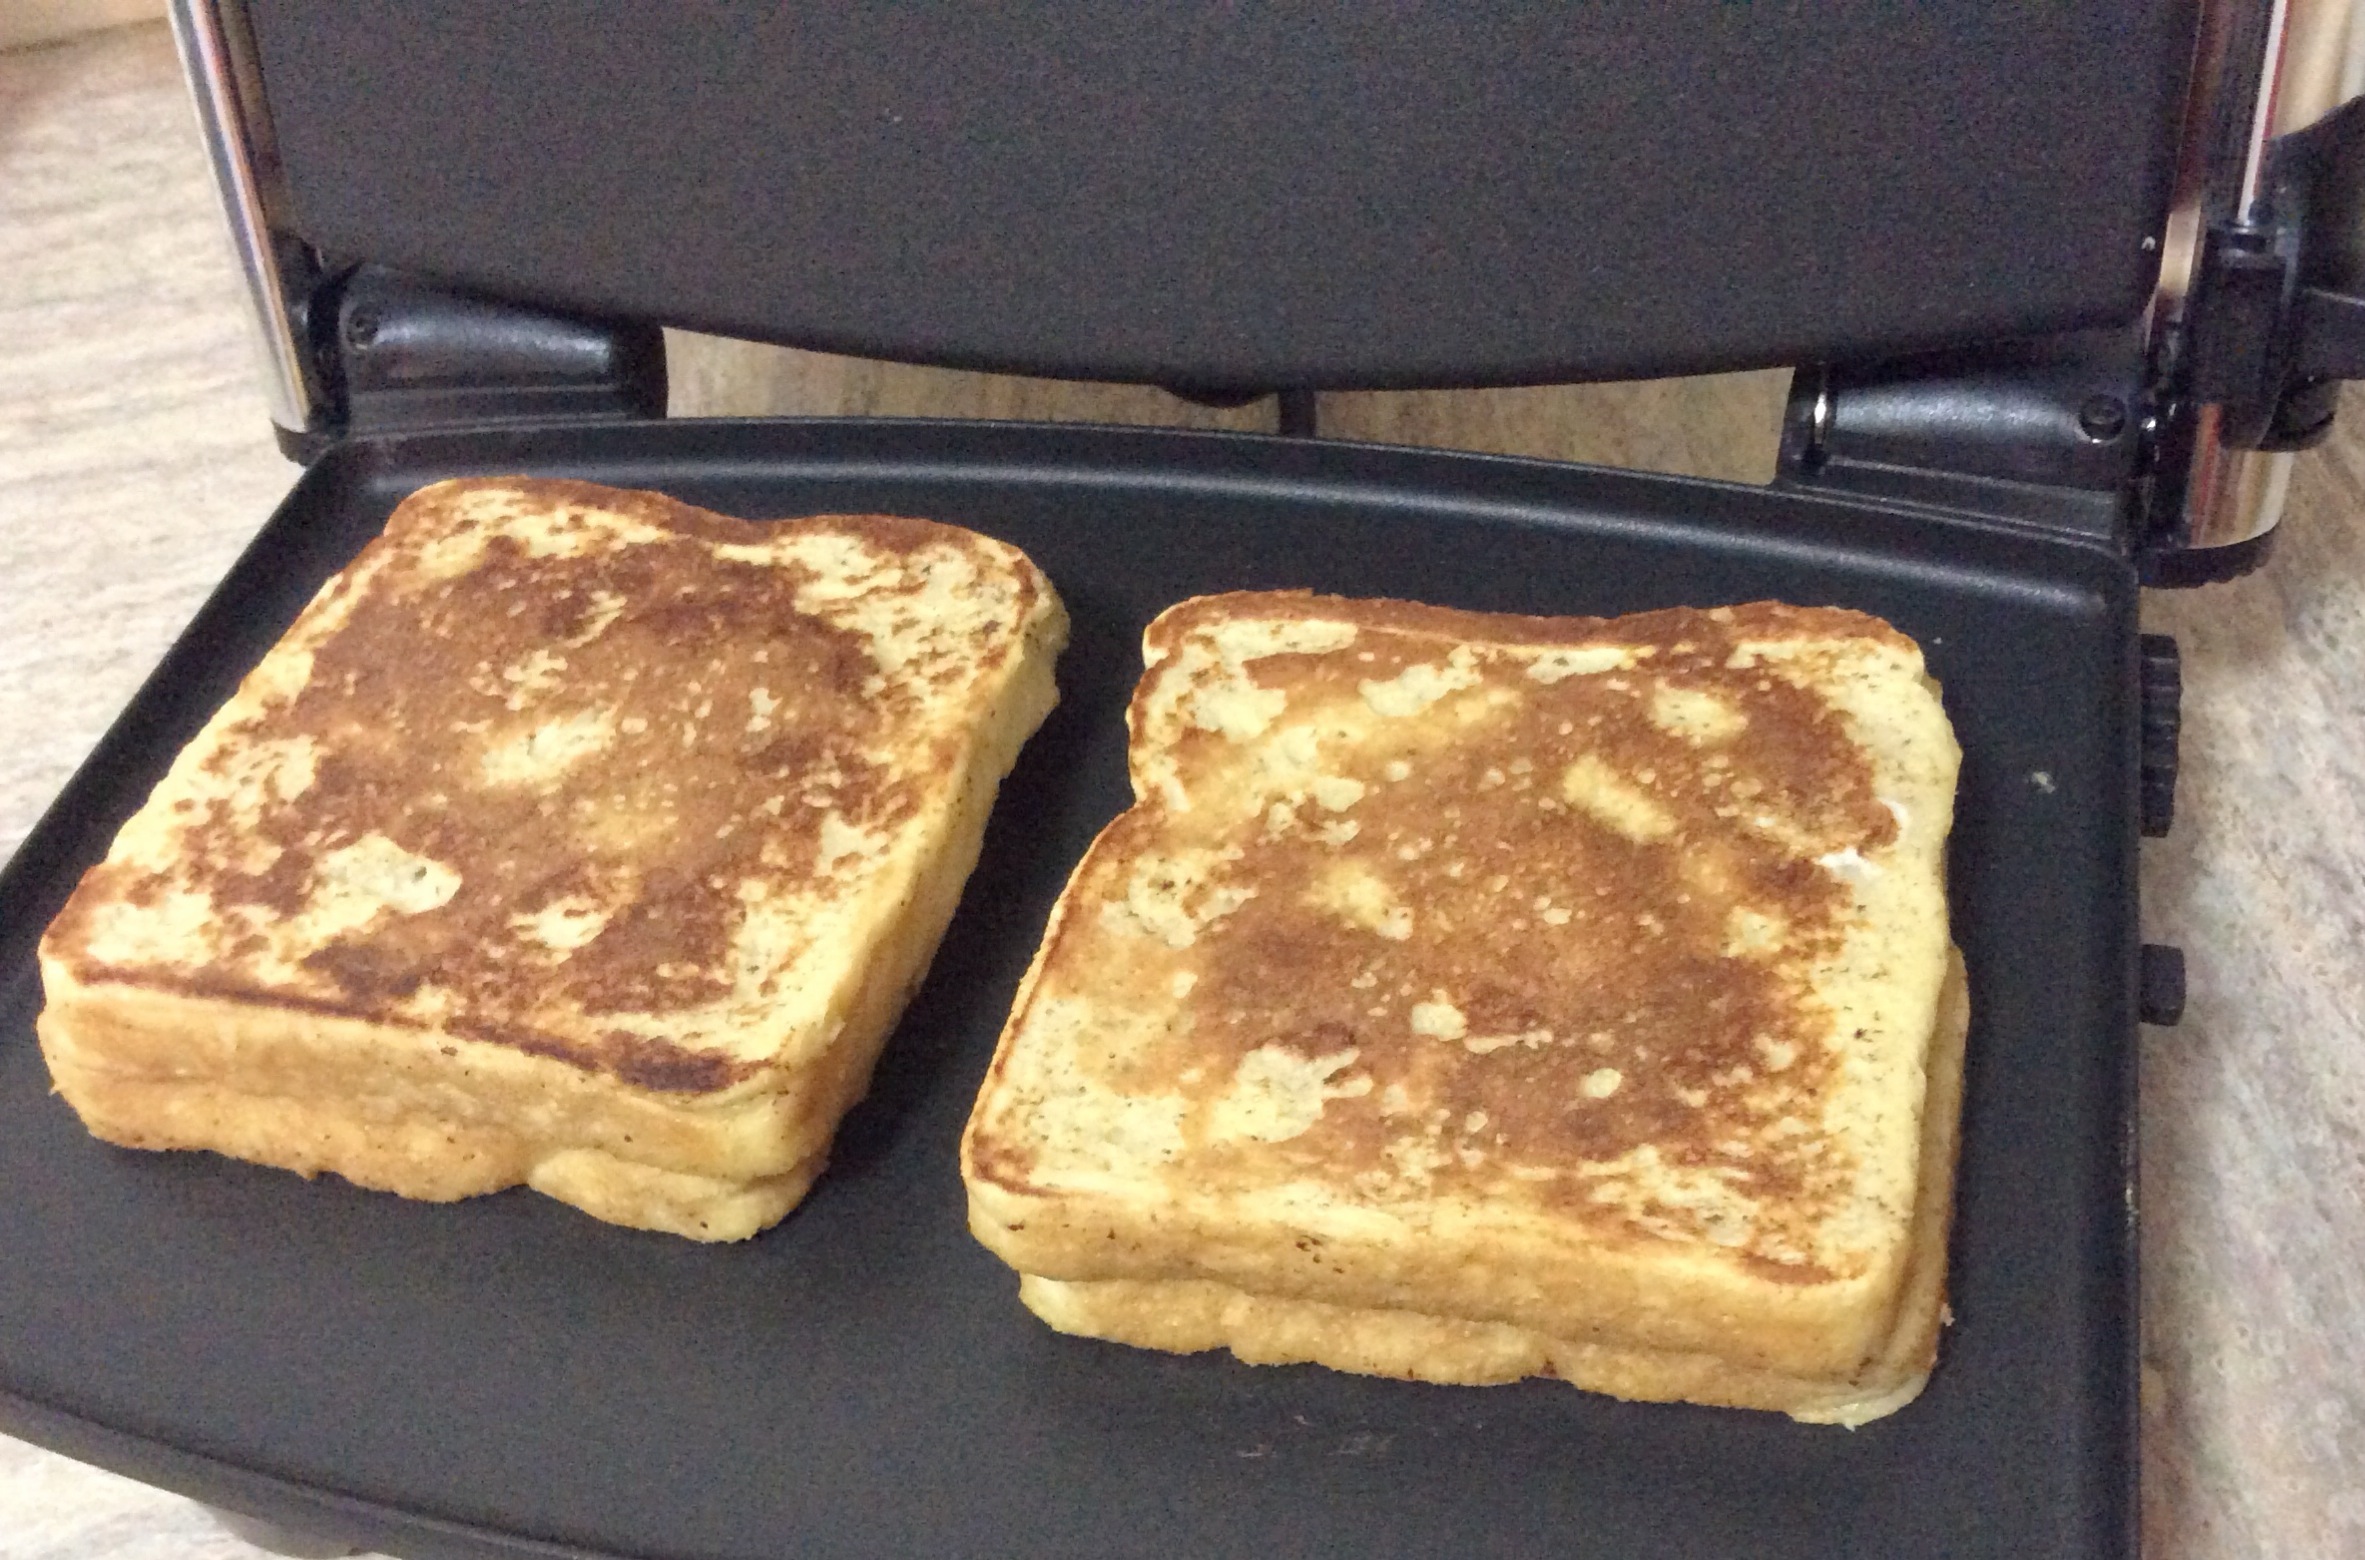 French toast made super fantastic using a sandwich press